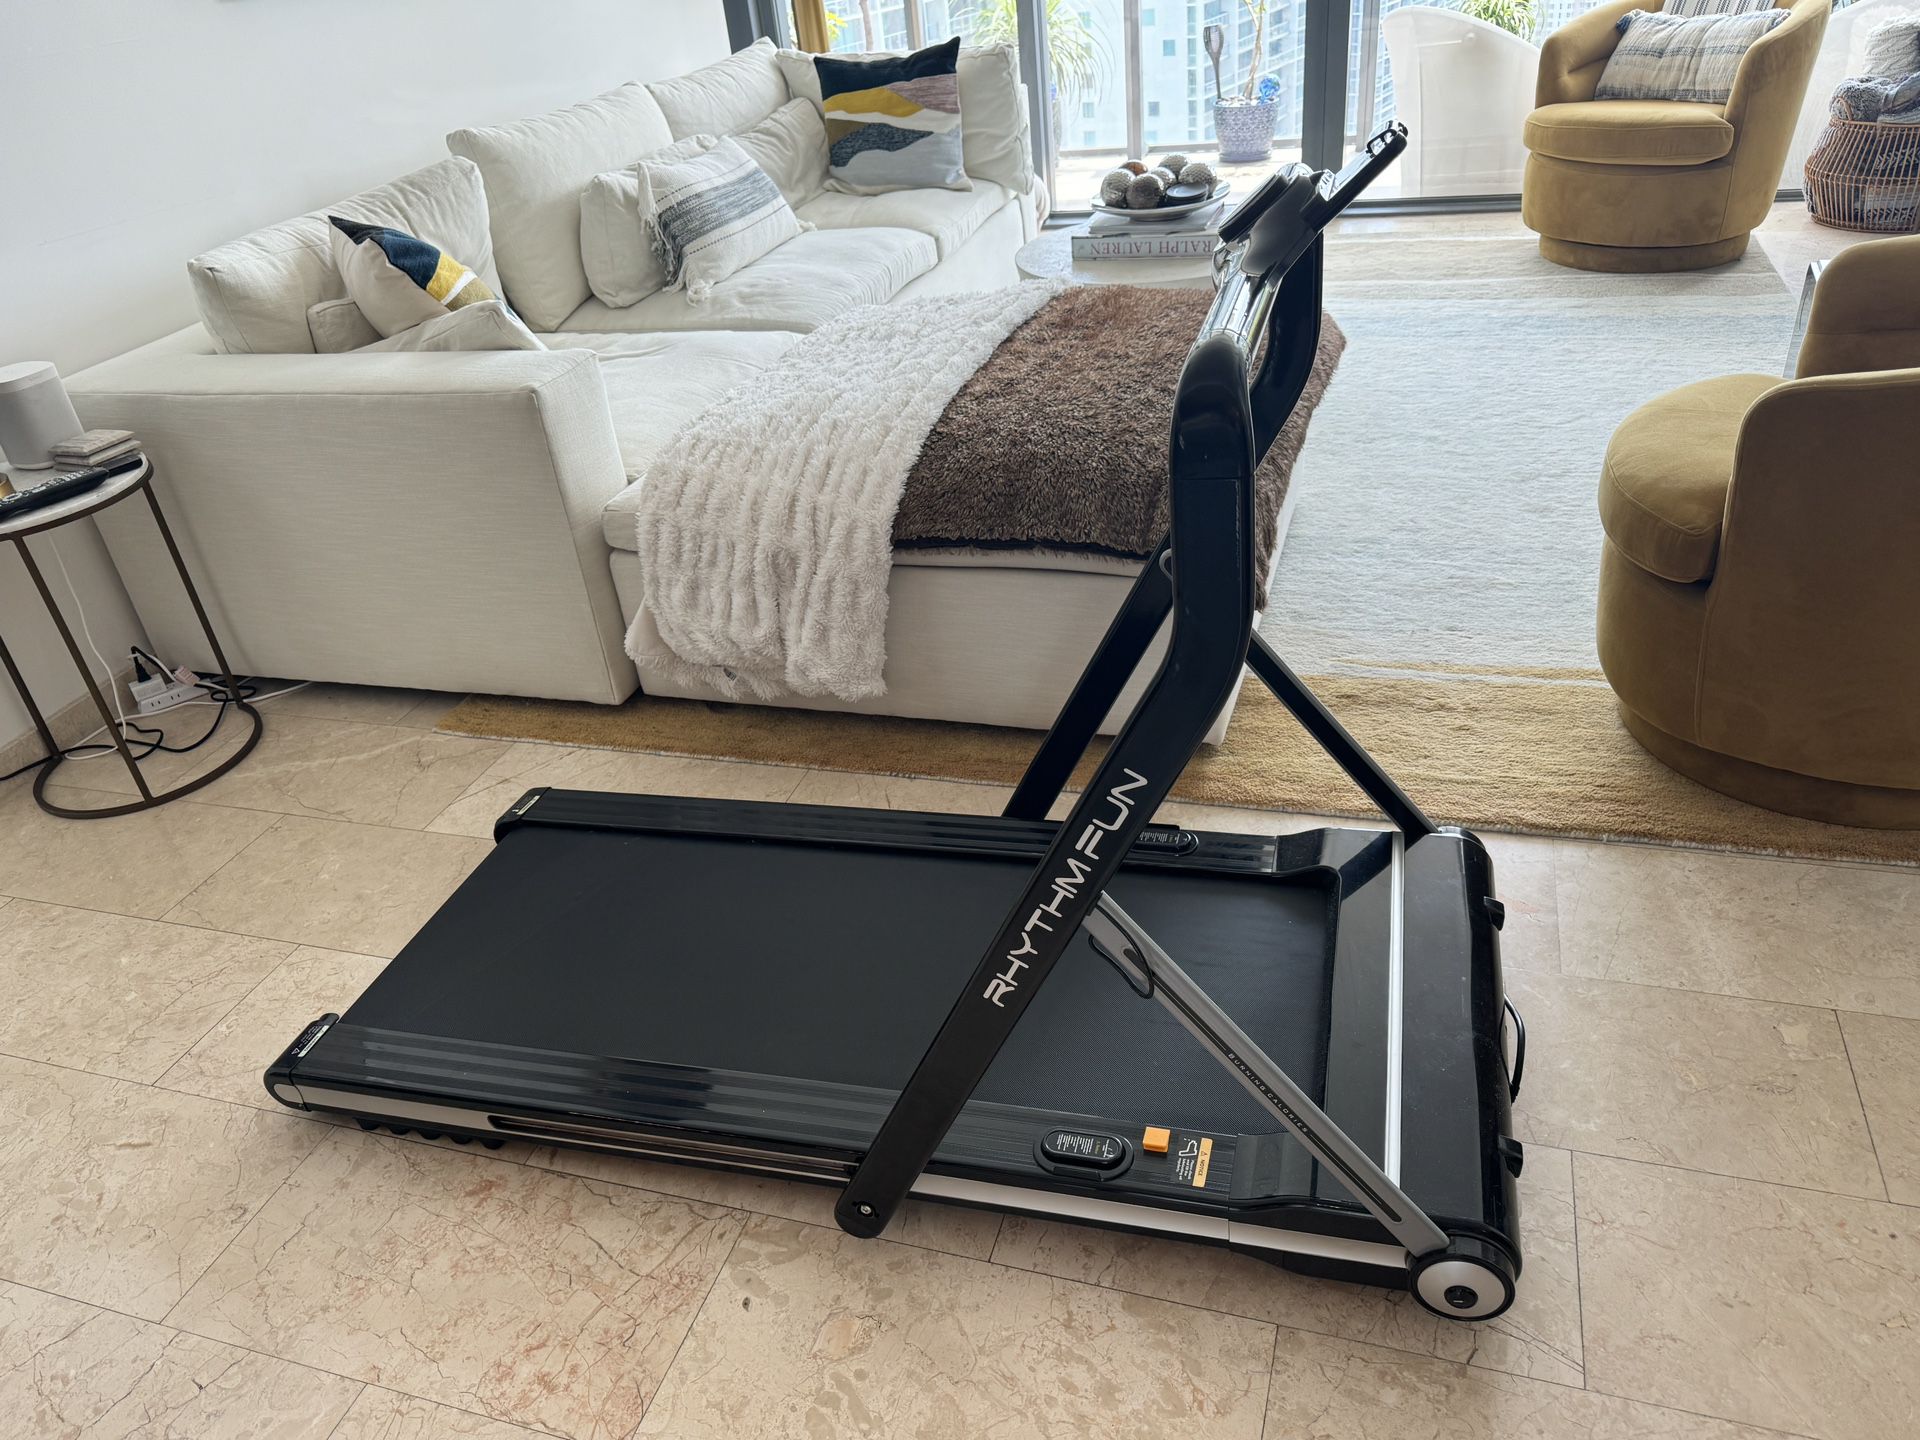 Rhythm Fun Treadmill With Collapsible Arm Rest